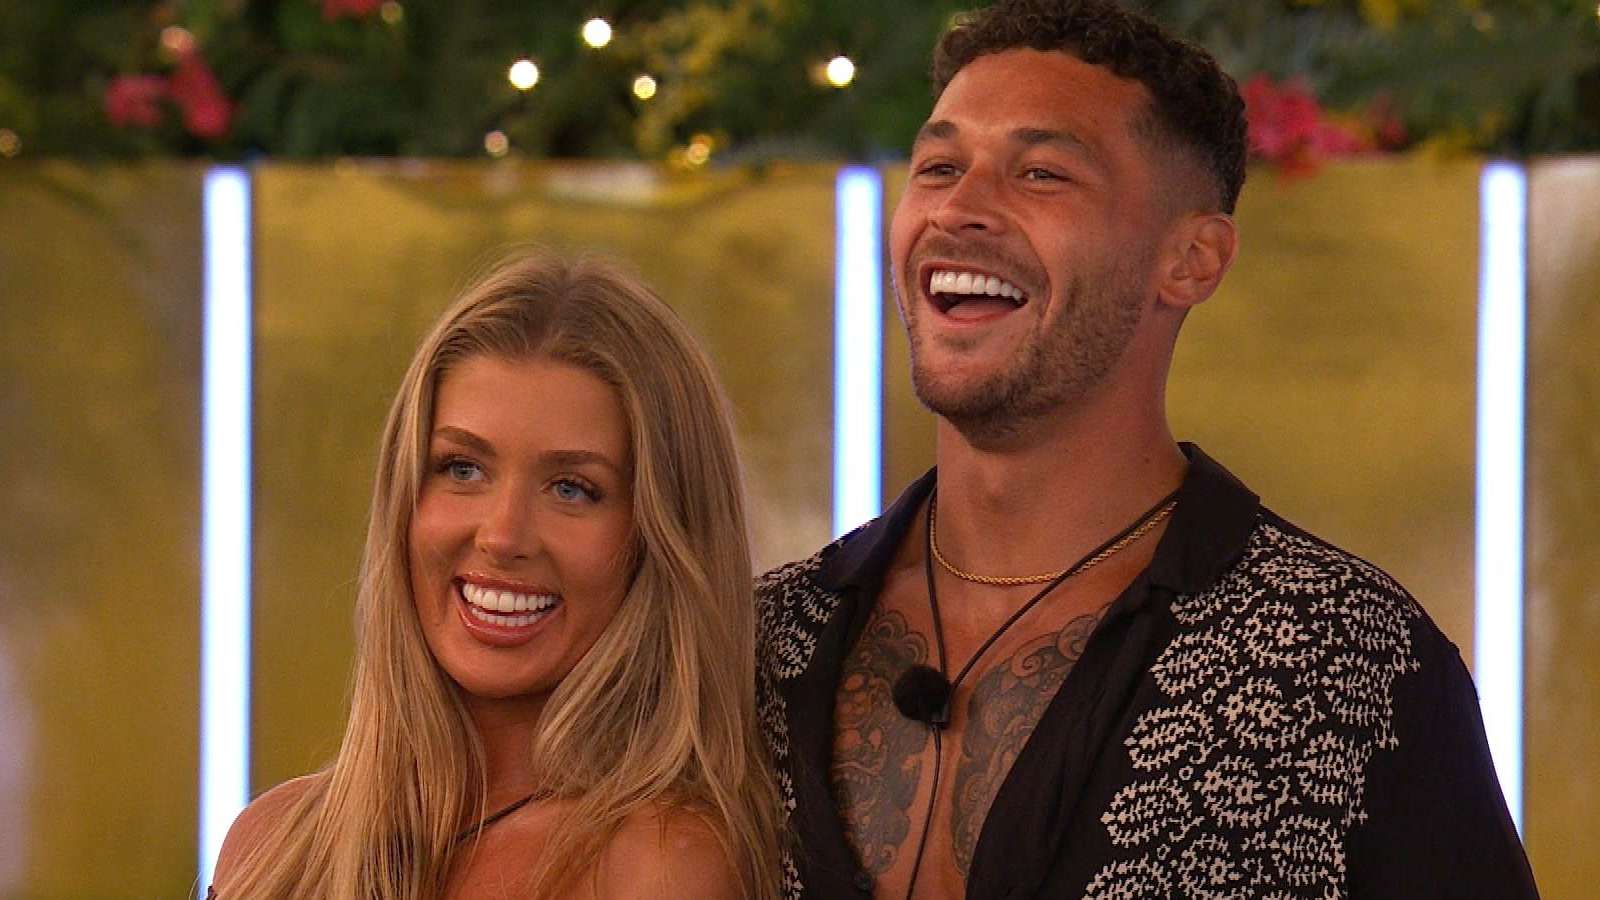 Are Callum and Jess still together after Love Island